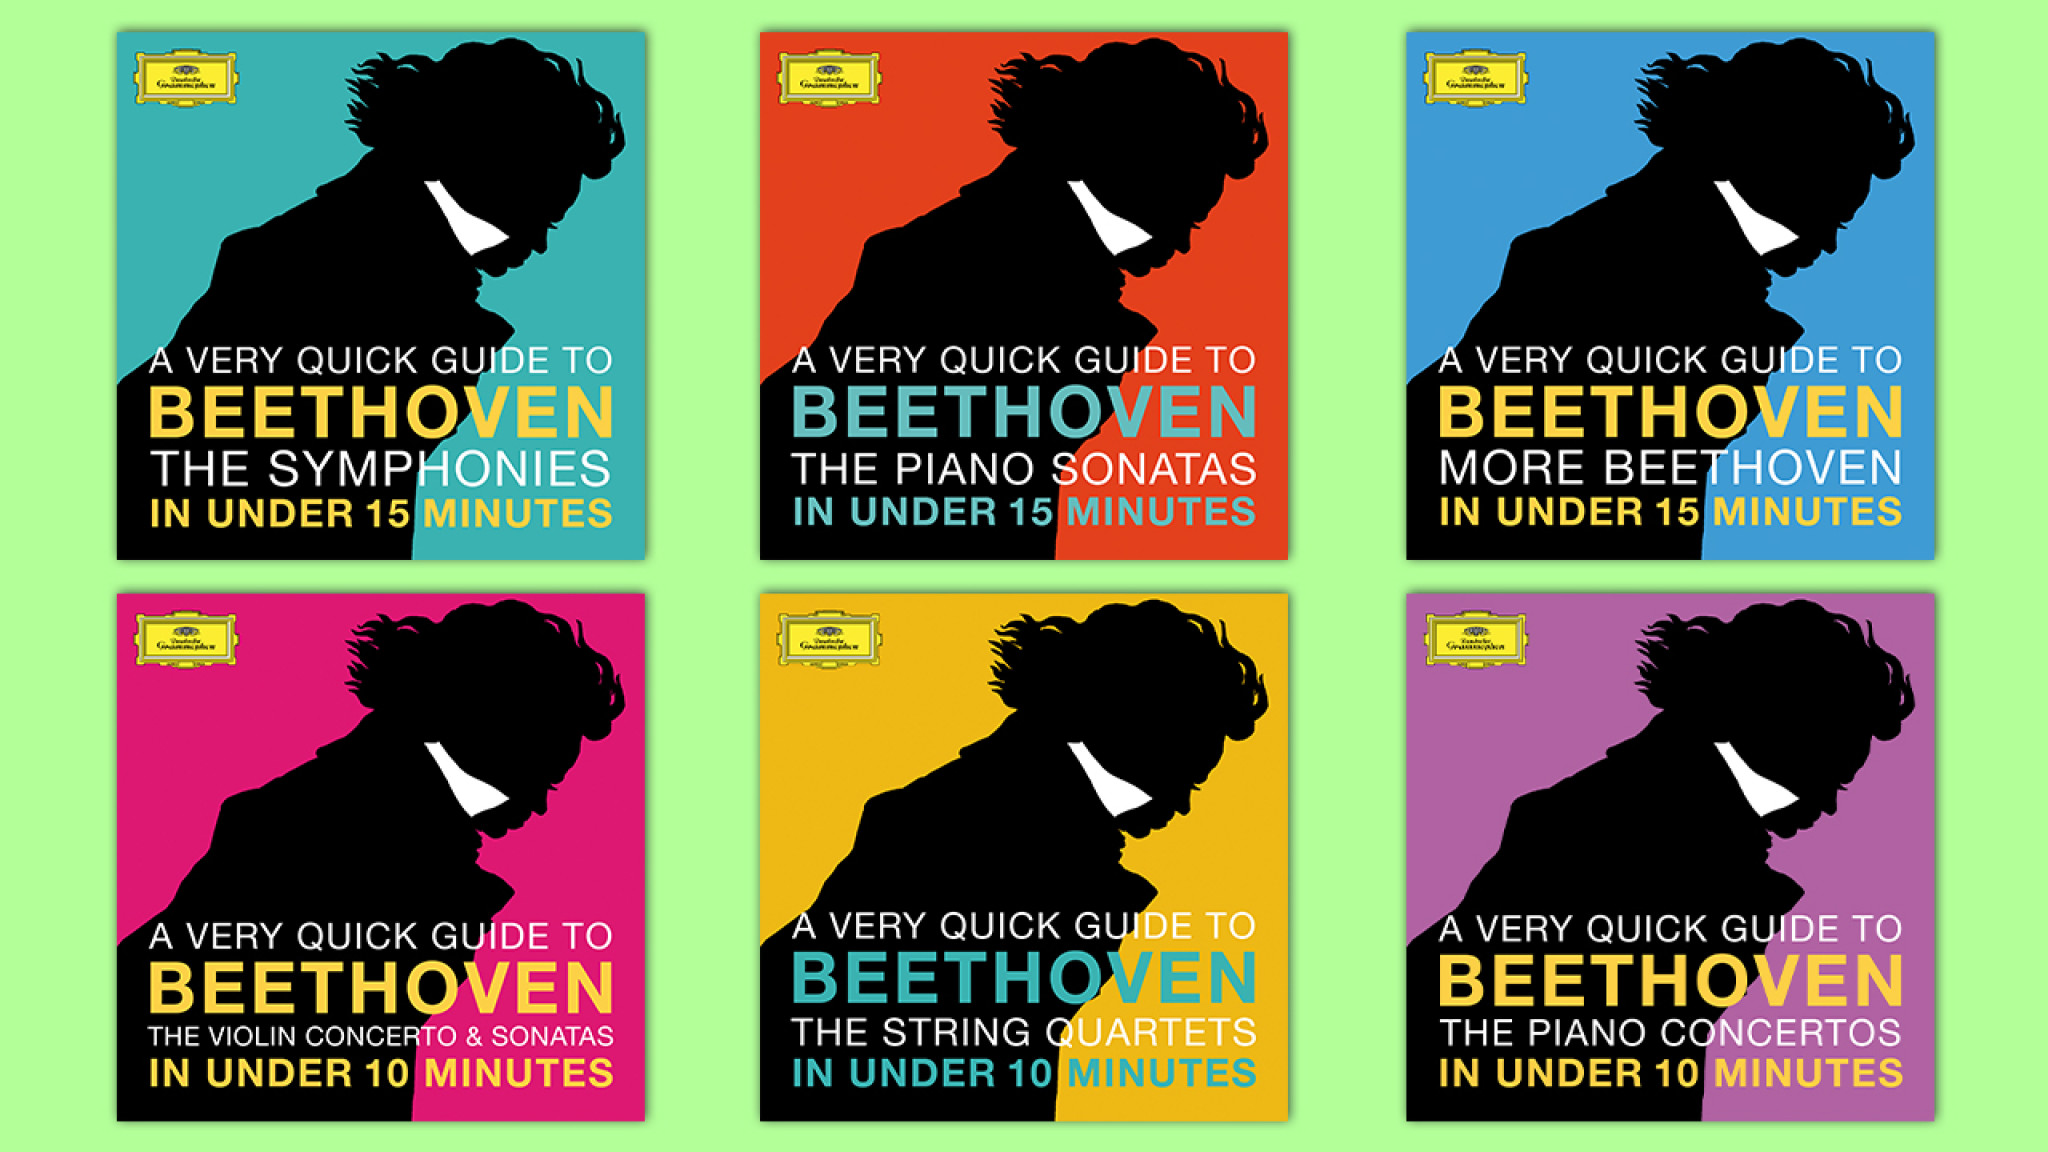 Do you know ALL of Beethoven's best-known melodies? Test yourself!